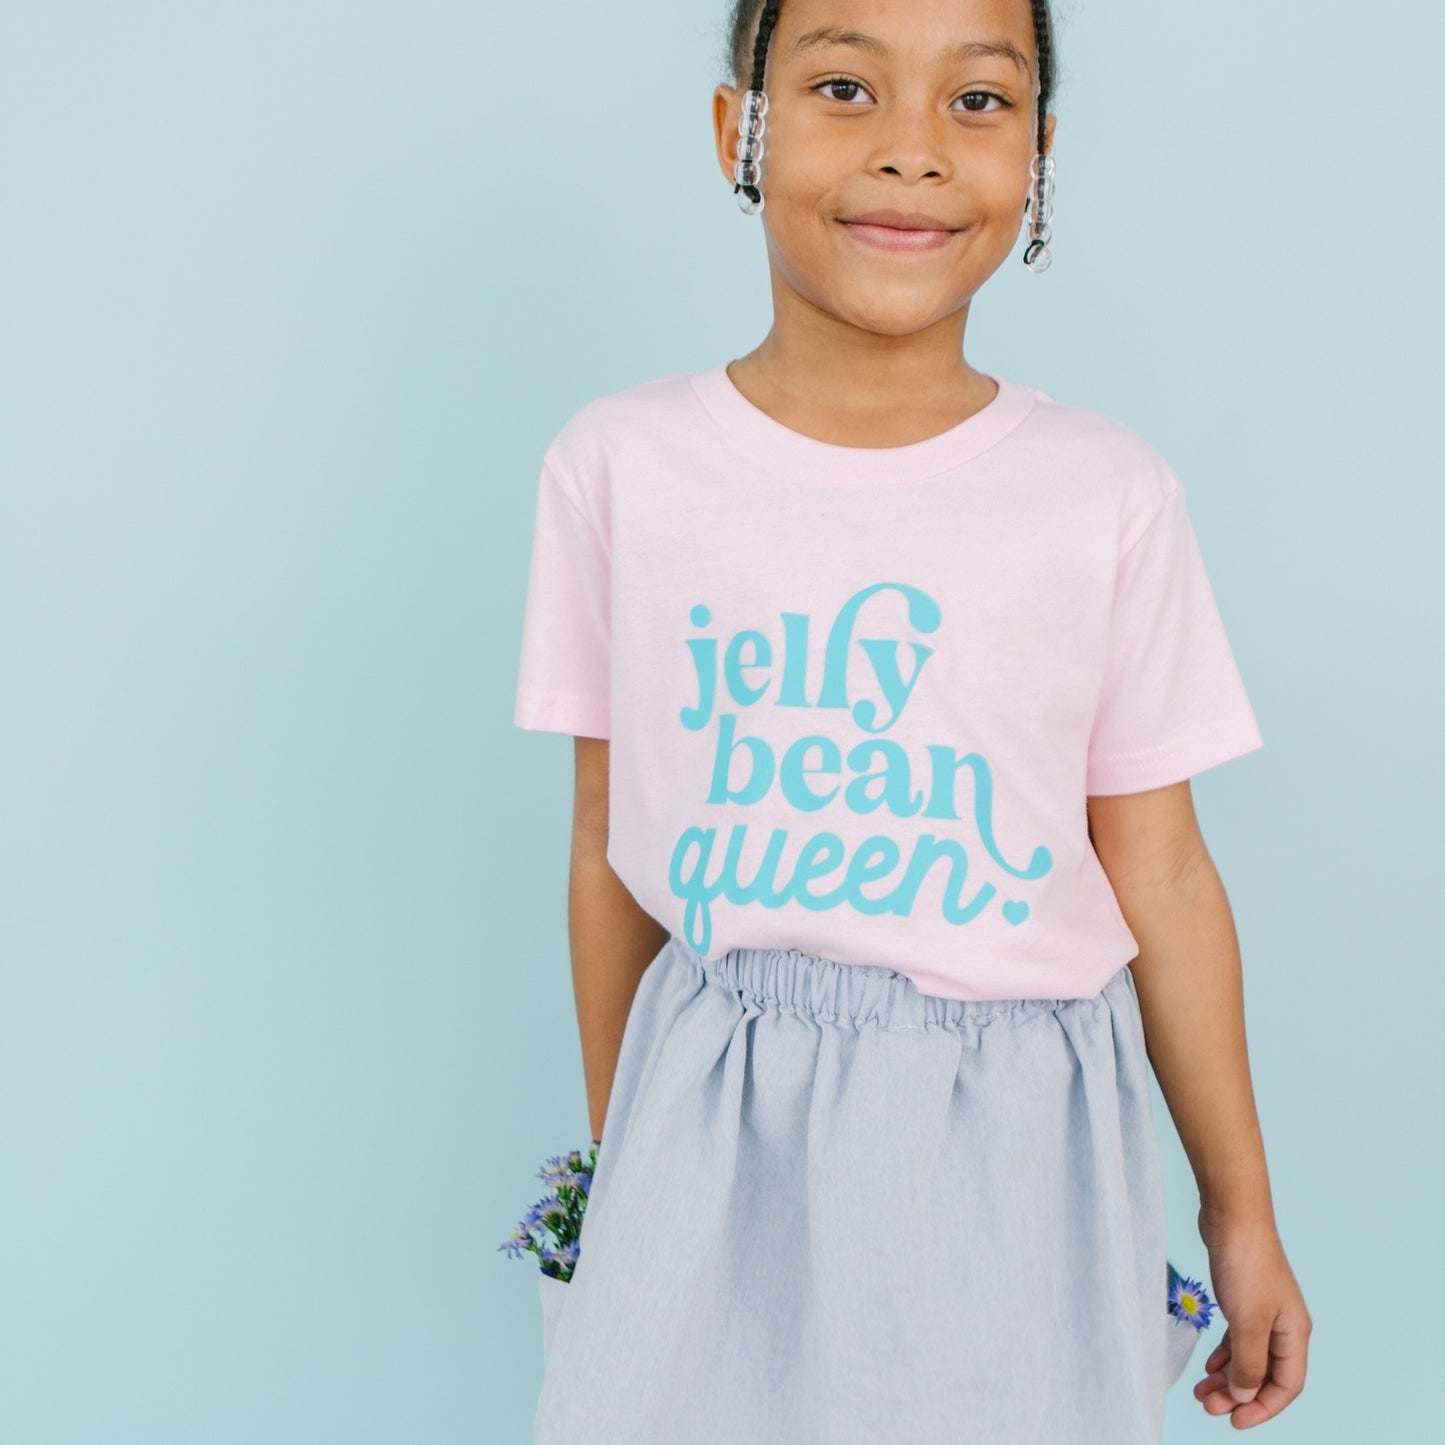 Kids Easter Graphic Tee, Jelly Bean Queen Pink/Blue